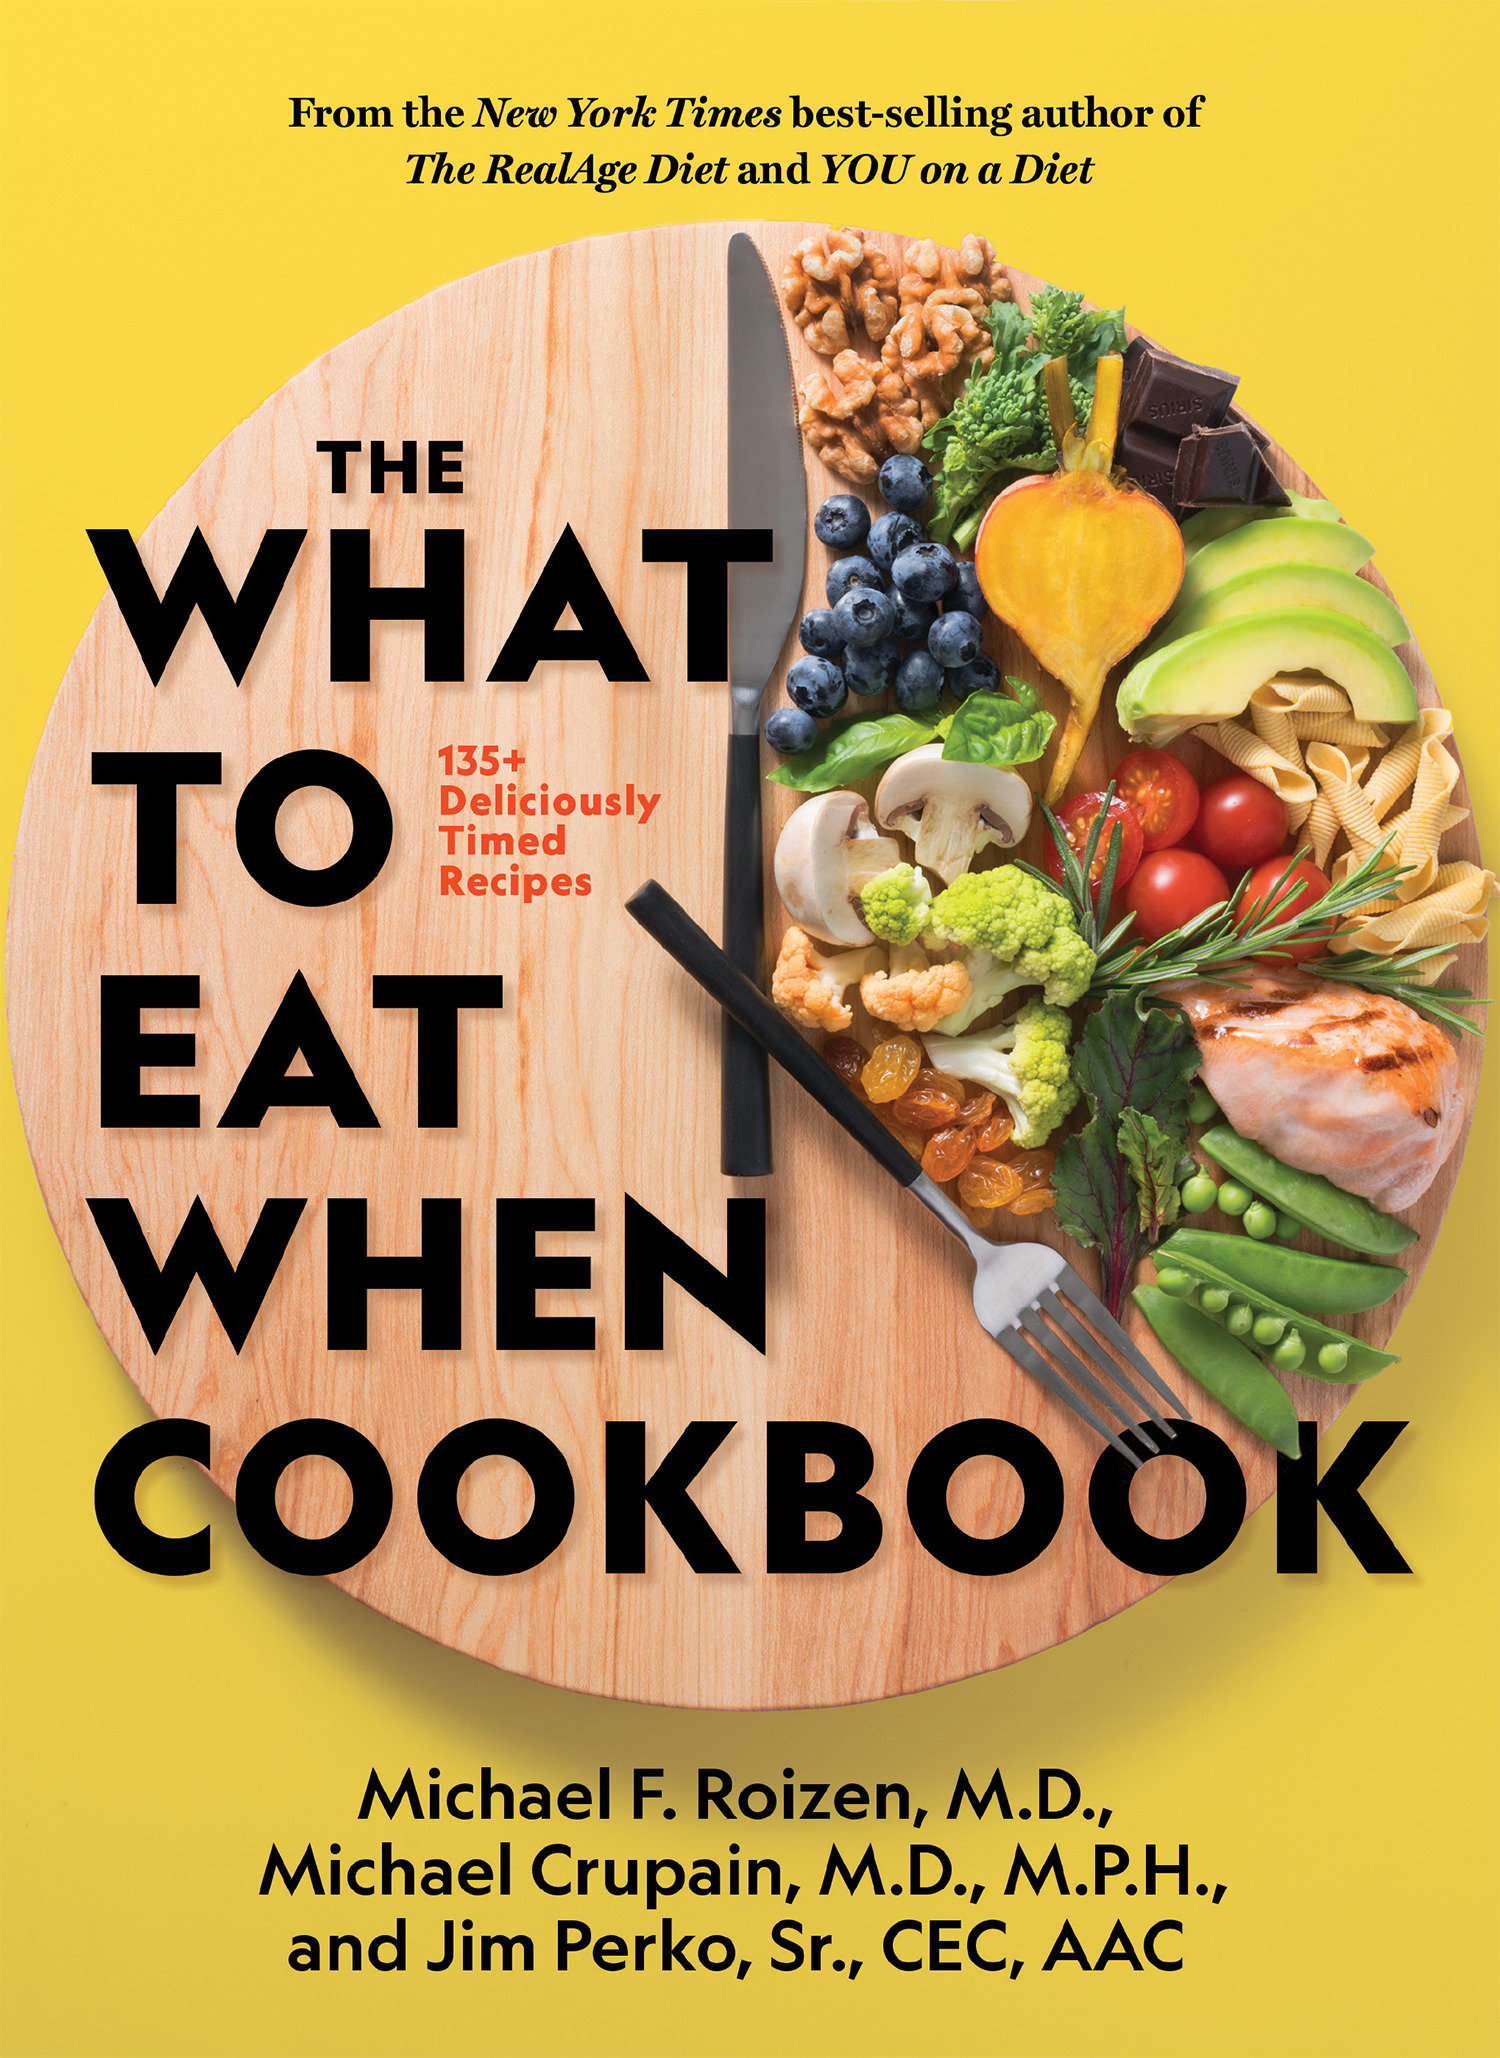 The What To Eat When Cookbook (Hardcover Book)